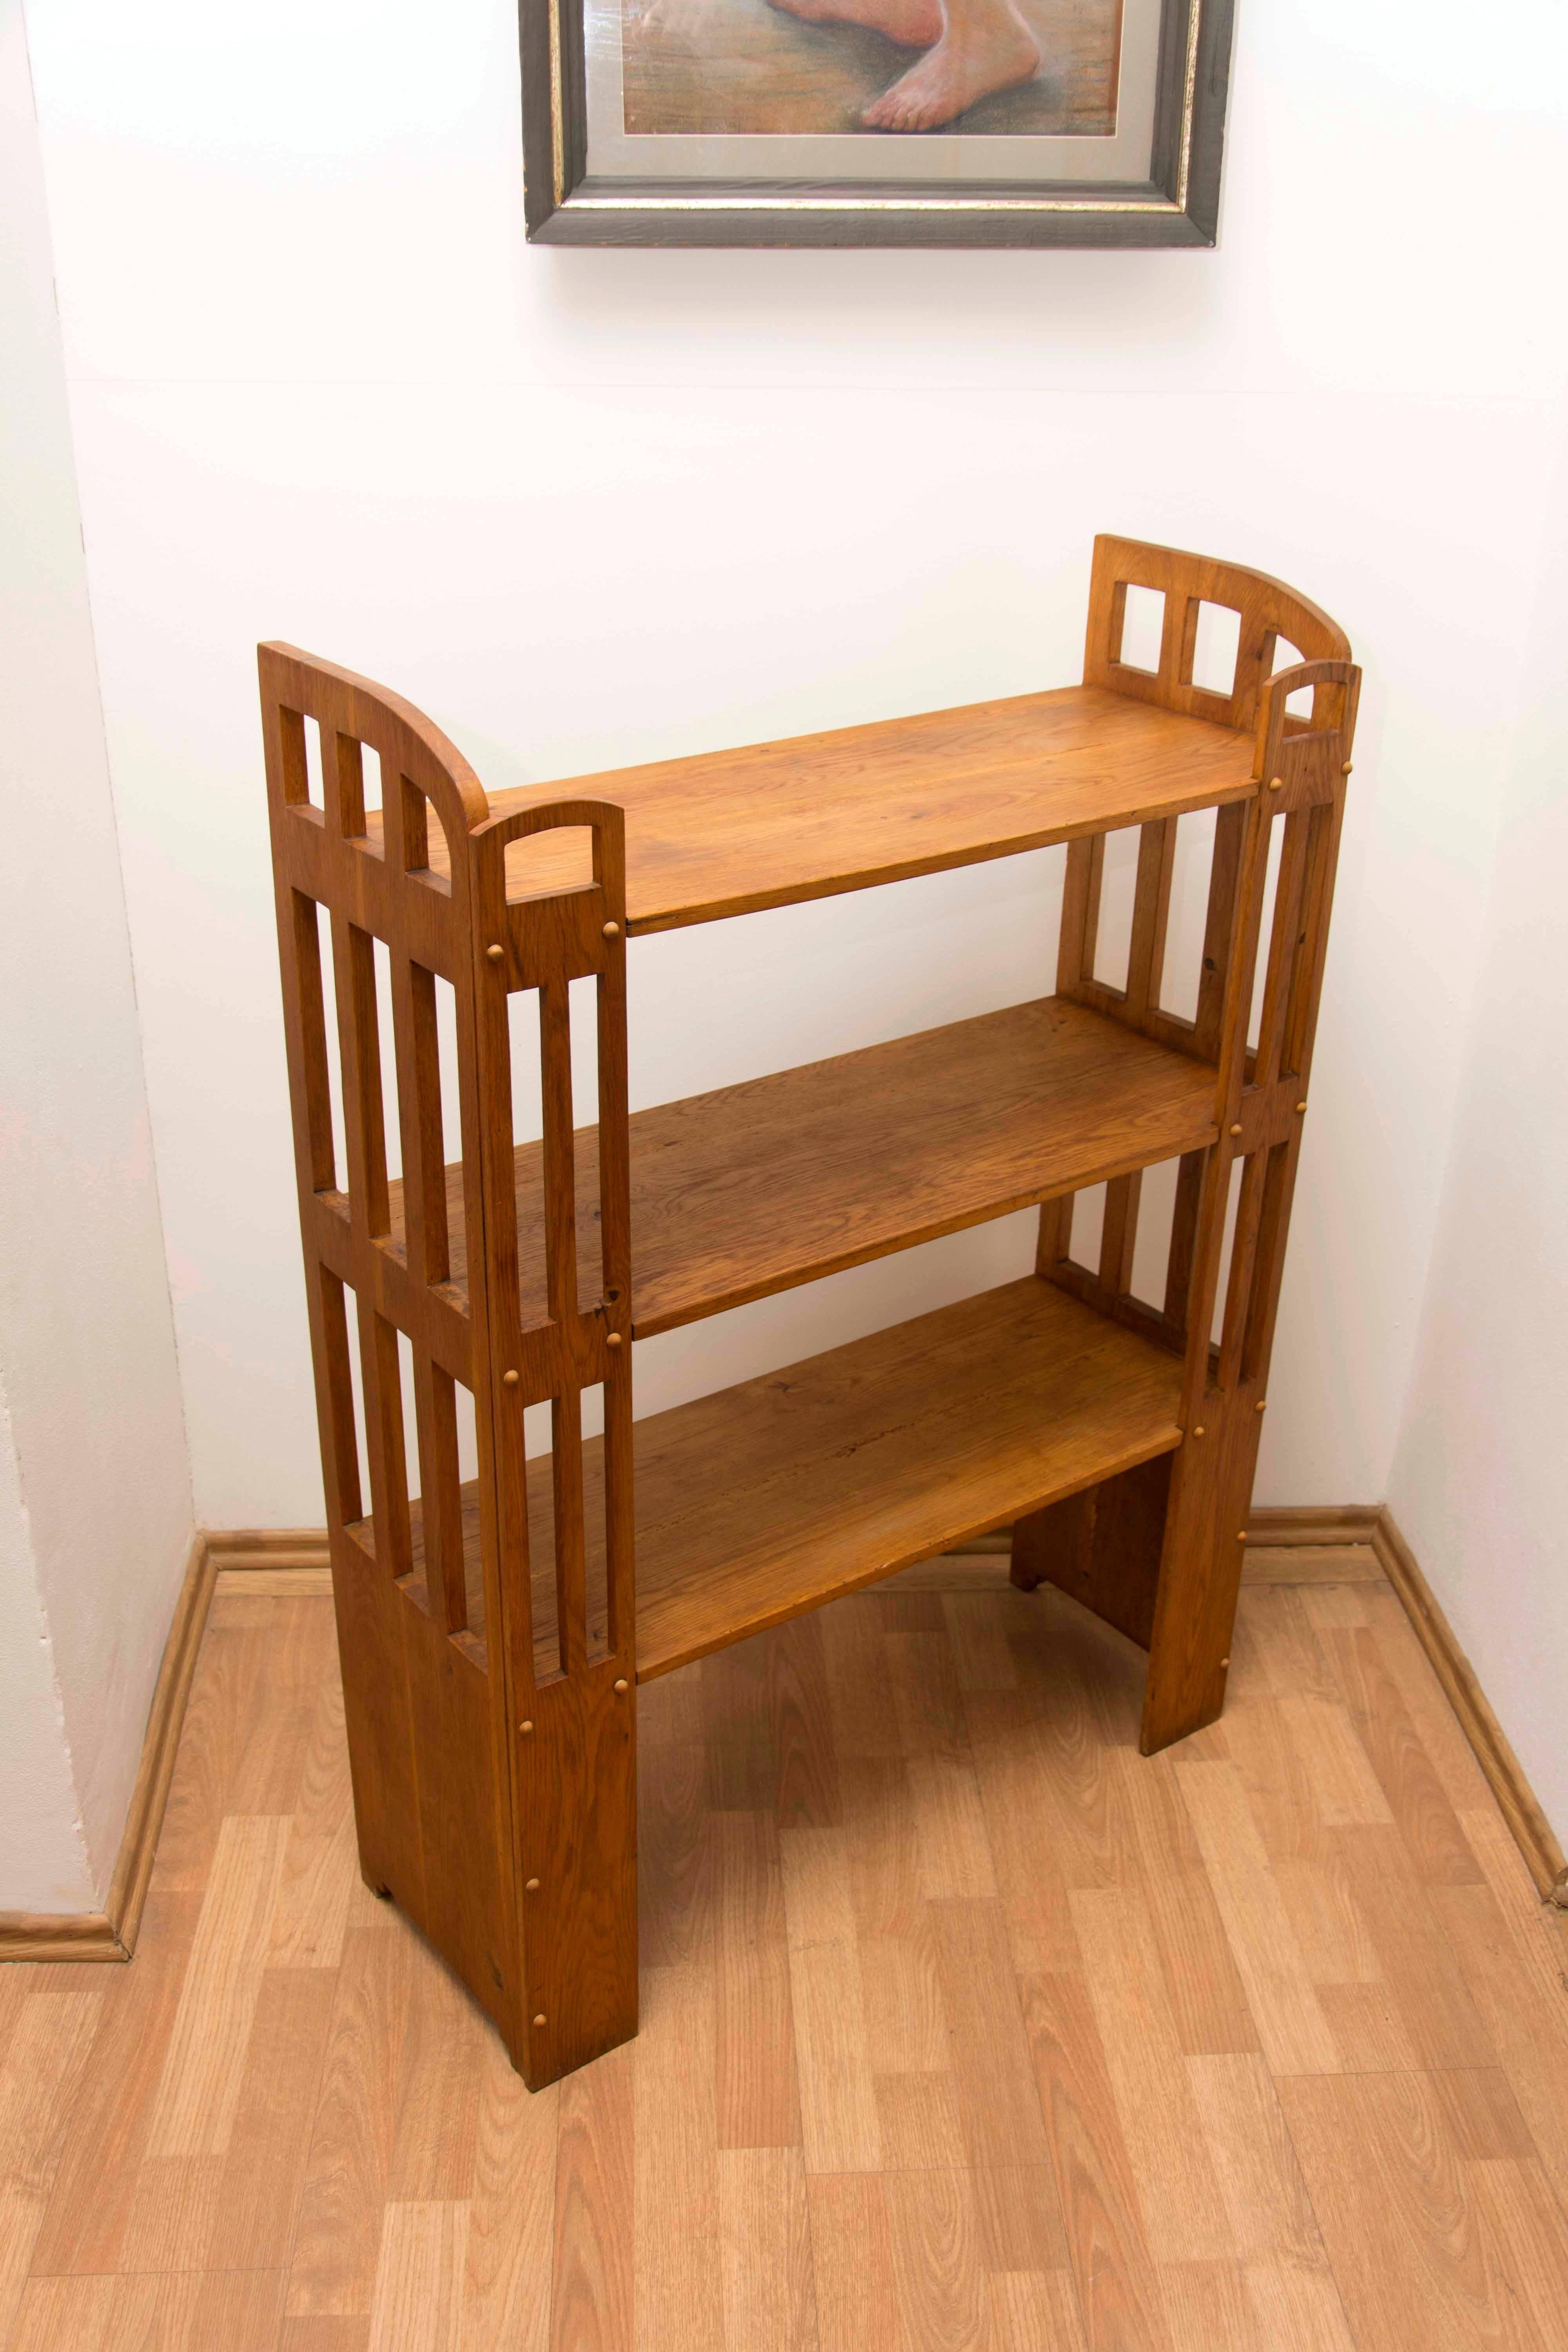 Viennese Secession Etagere, circa 1910, Austria-Hungary In Good Condition In Prague 8, CZ